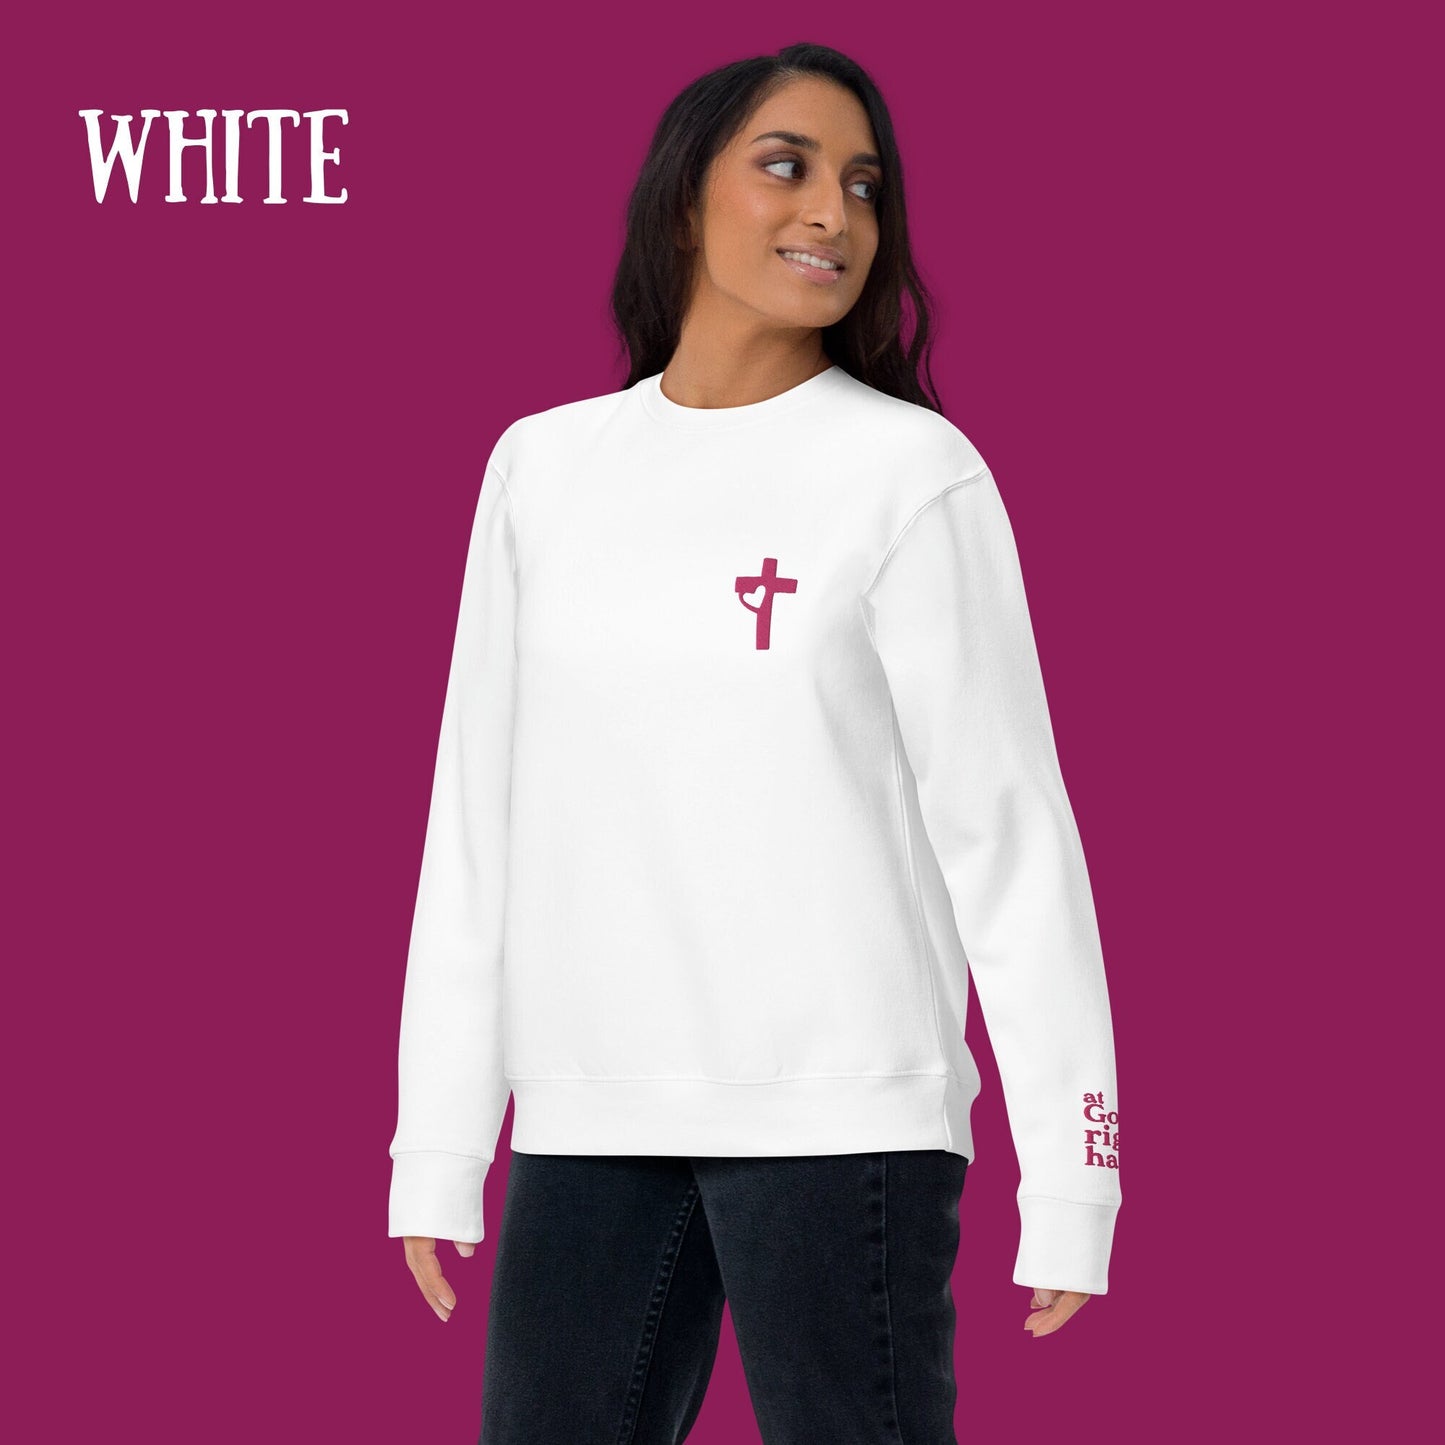 Embroidered Sweatshirt | Gift for Her | Christian Faith Shirt | Embroidered Sleeve | Gift for Mom | Jesus Sweatshirt | God's Right Hand